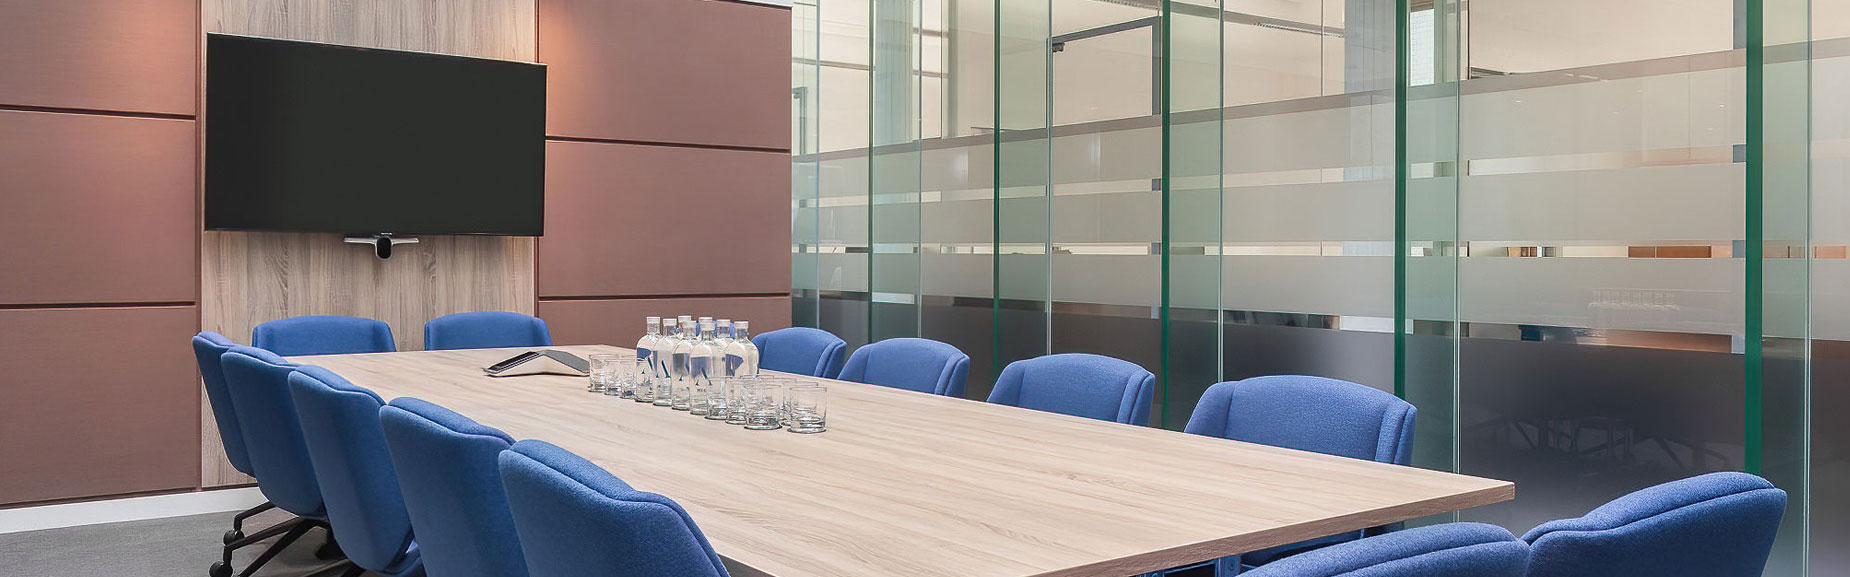 Argyll - Central Court - Meeting room